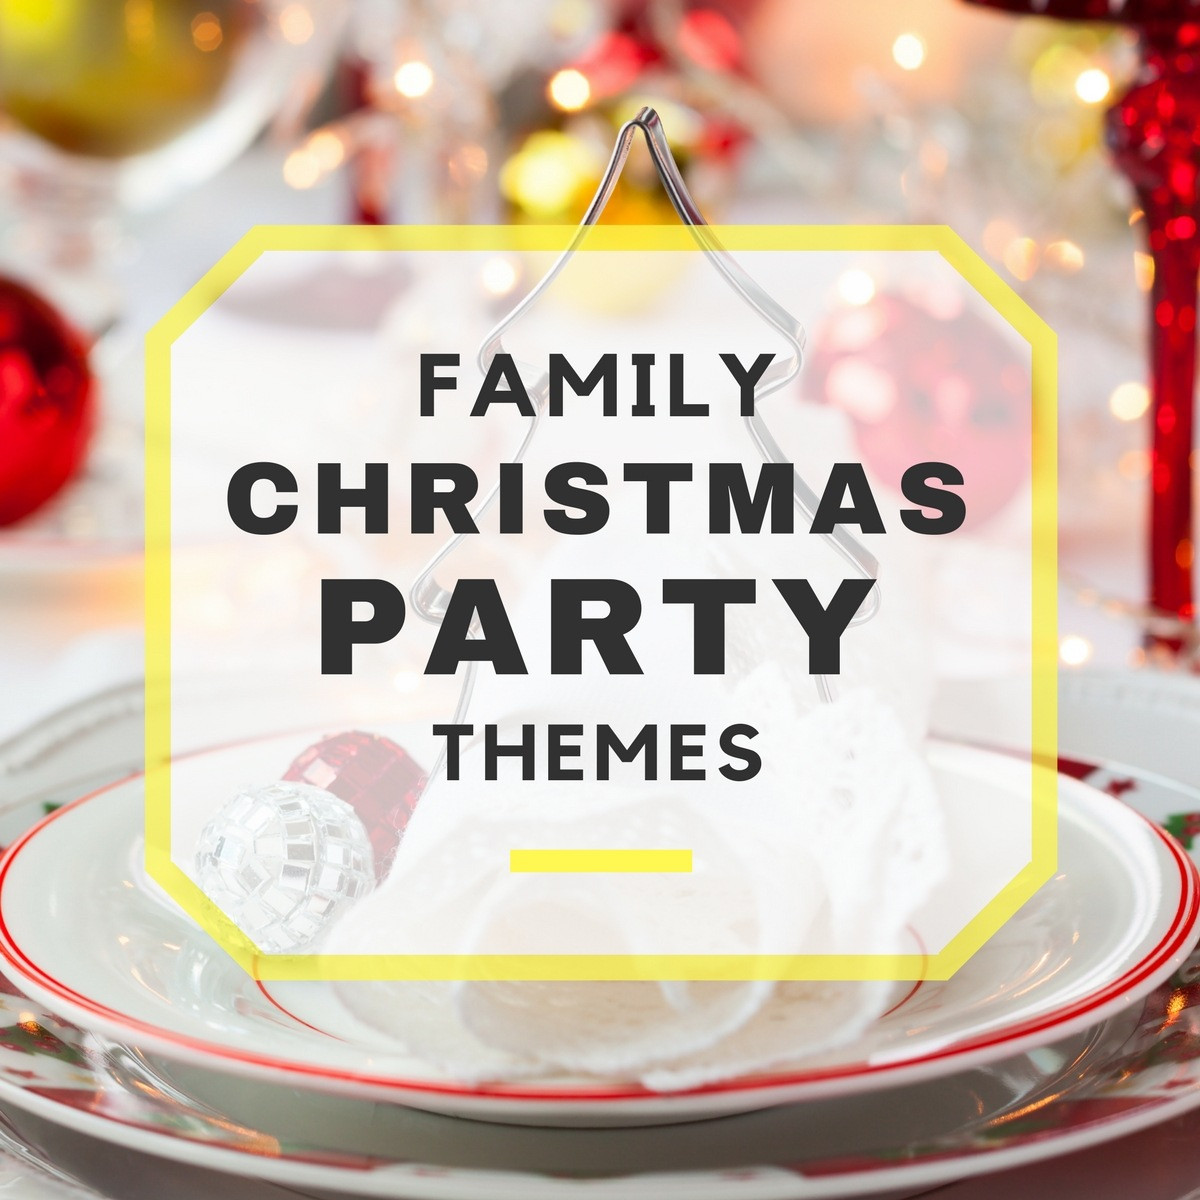 Ideas For Family Christmas Party
 Family Christmas Party Themes